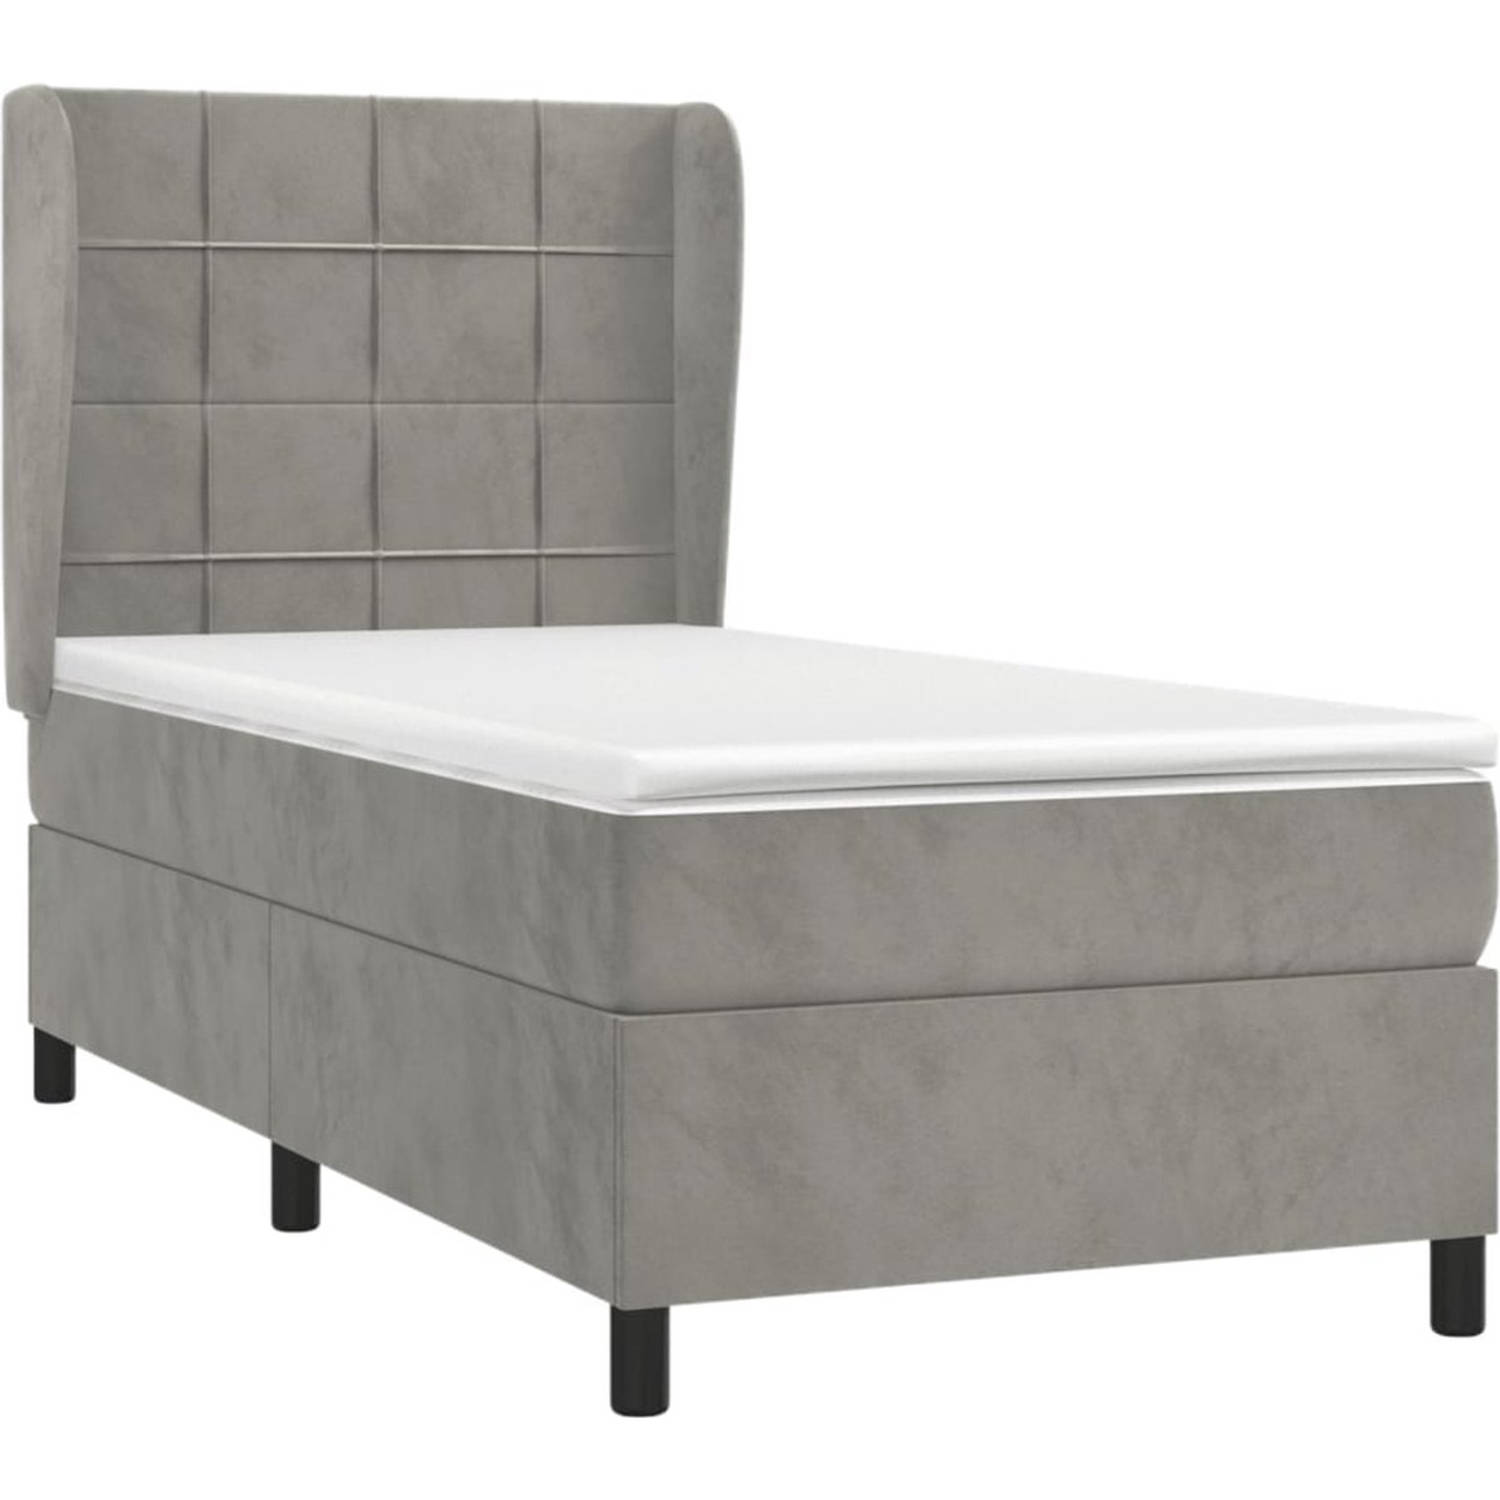 The Living Store Bed The Living Store Boxspringbed - 203 x 83 x 118/128 cm - Lichtgrijs Fluweel